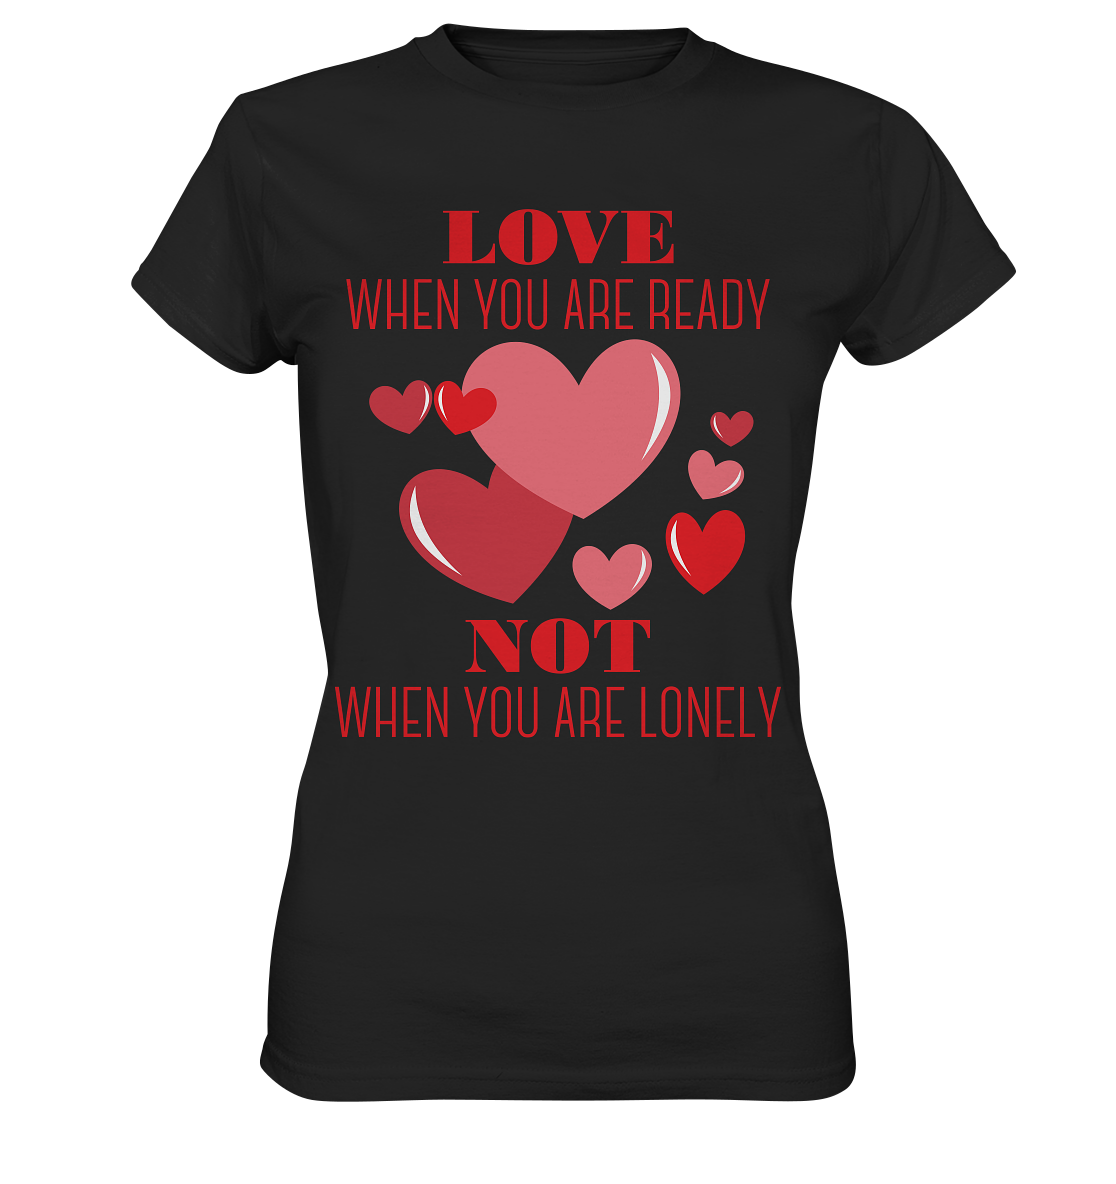 Love when you are ready .. - Ladies Premium Shirt